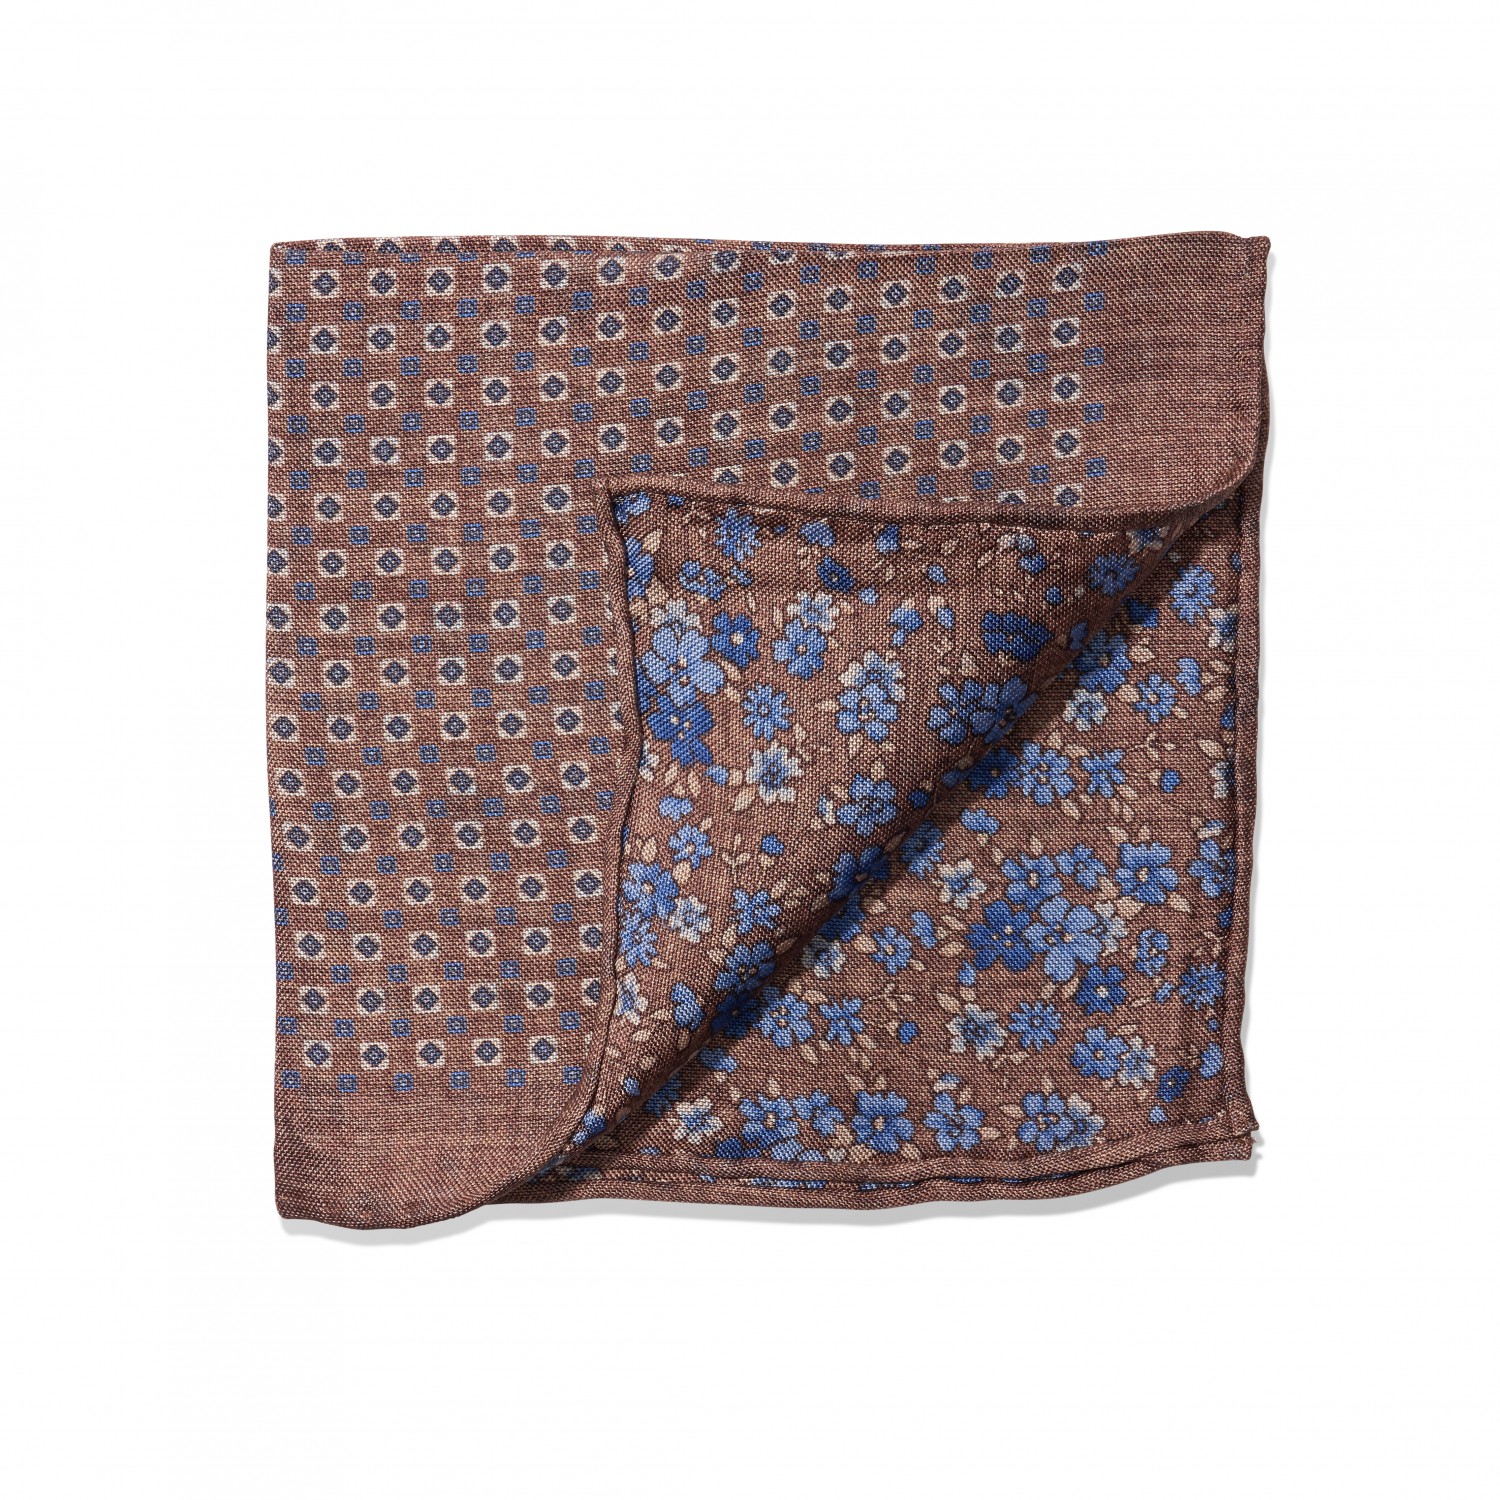 Tan & Blue Geometric Dots & Floral Double Sided Pocket Square